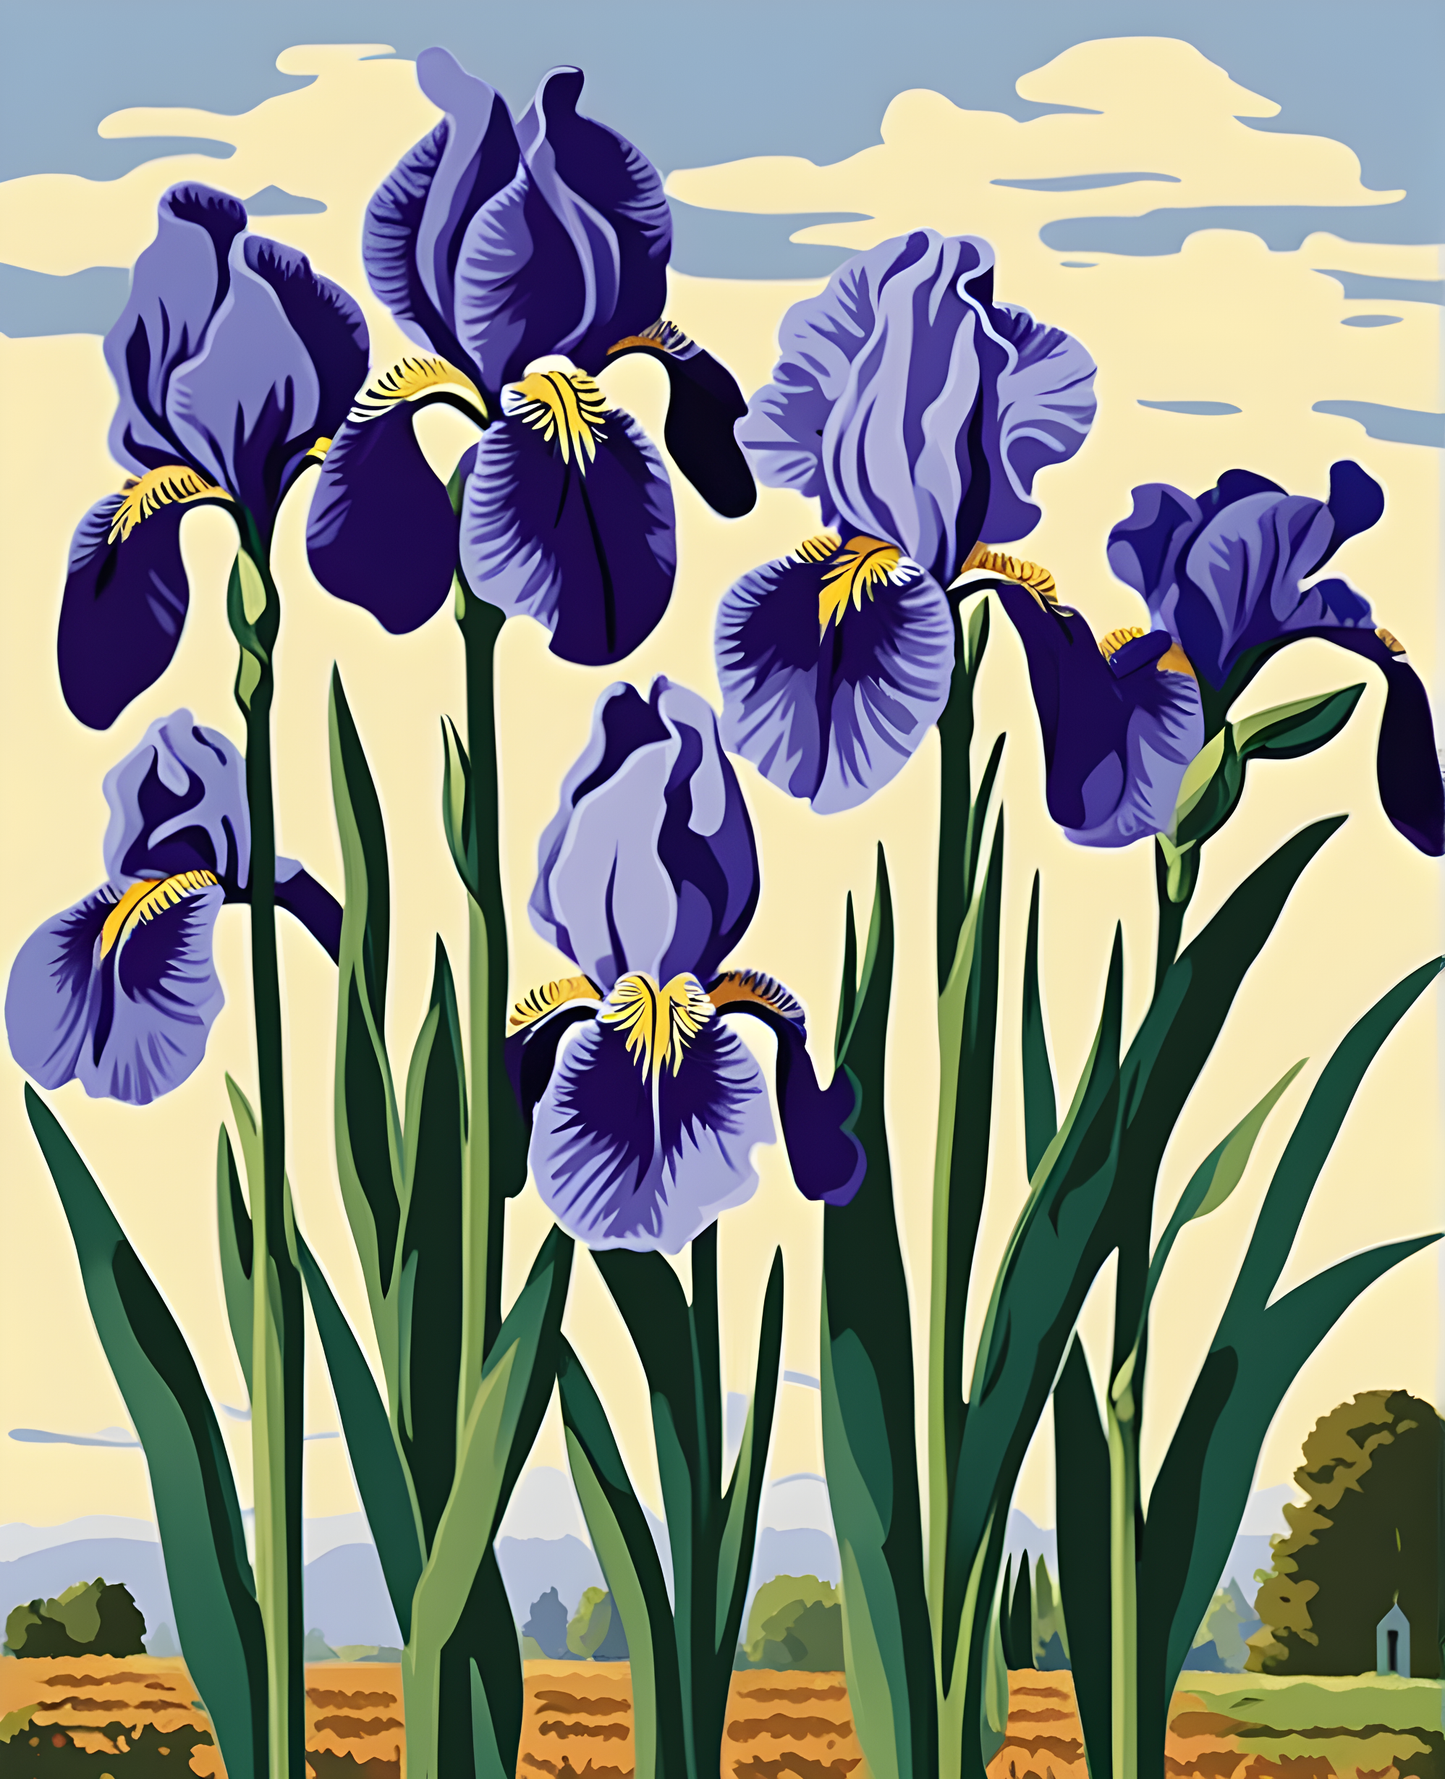 Flowers Collection OD (72) - Irises - Van-Go Paint-By-Number Kit